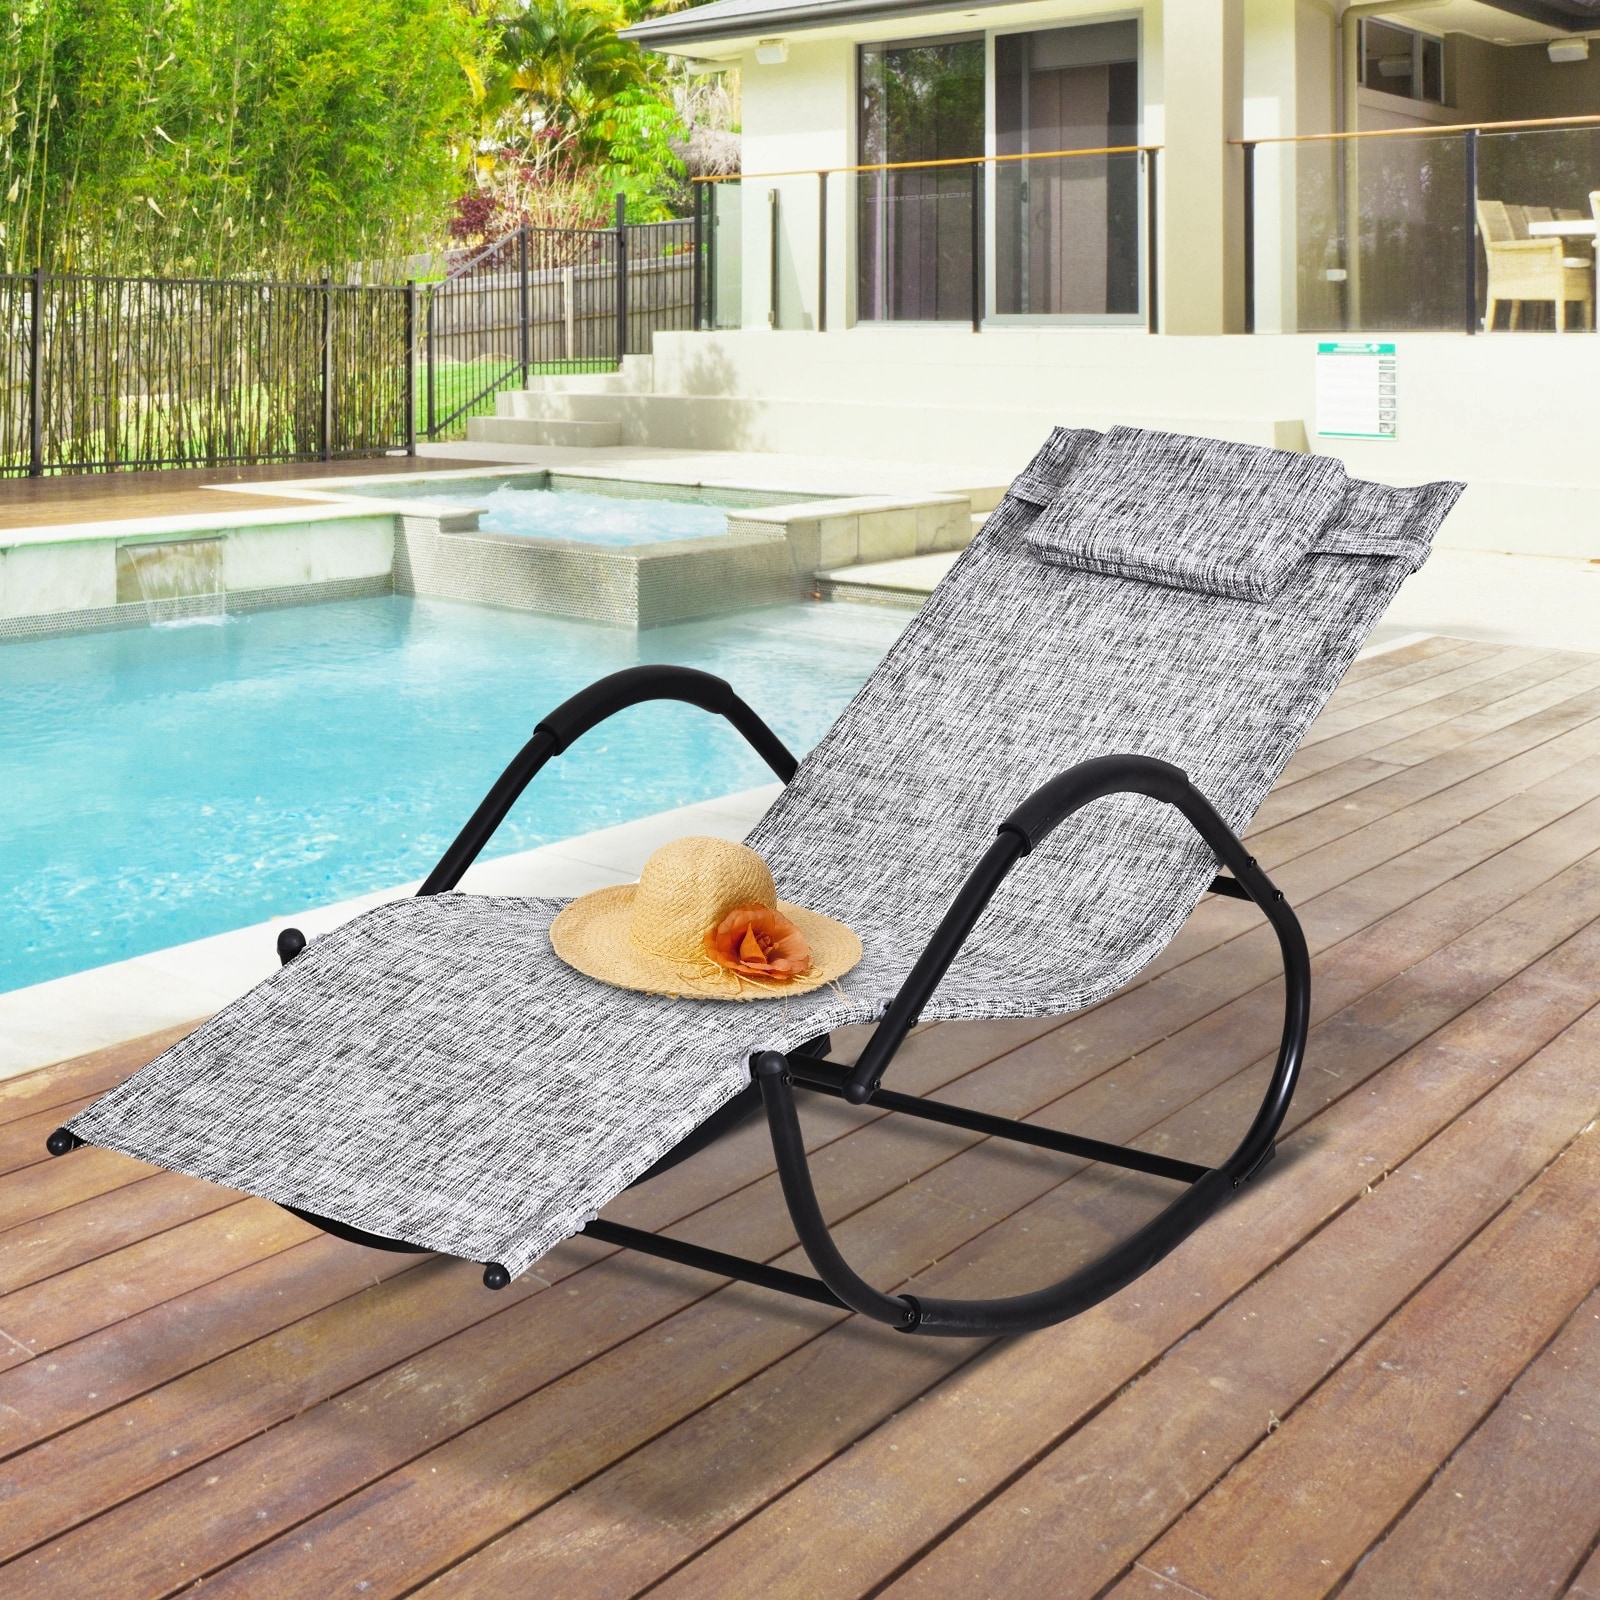 Outsunny Zero-Gravity Rocking Lounge Chair with Weather-Resistant Material  for Backyard Bed Bath  Beyond 31020557